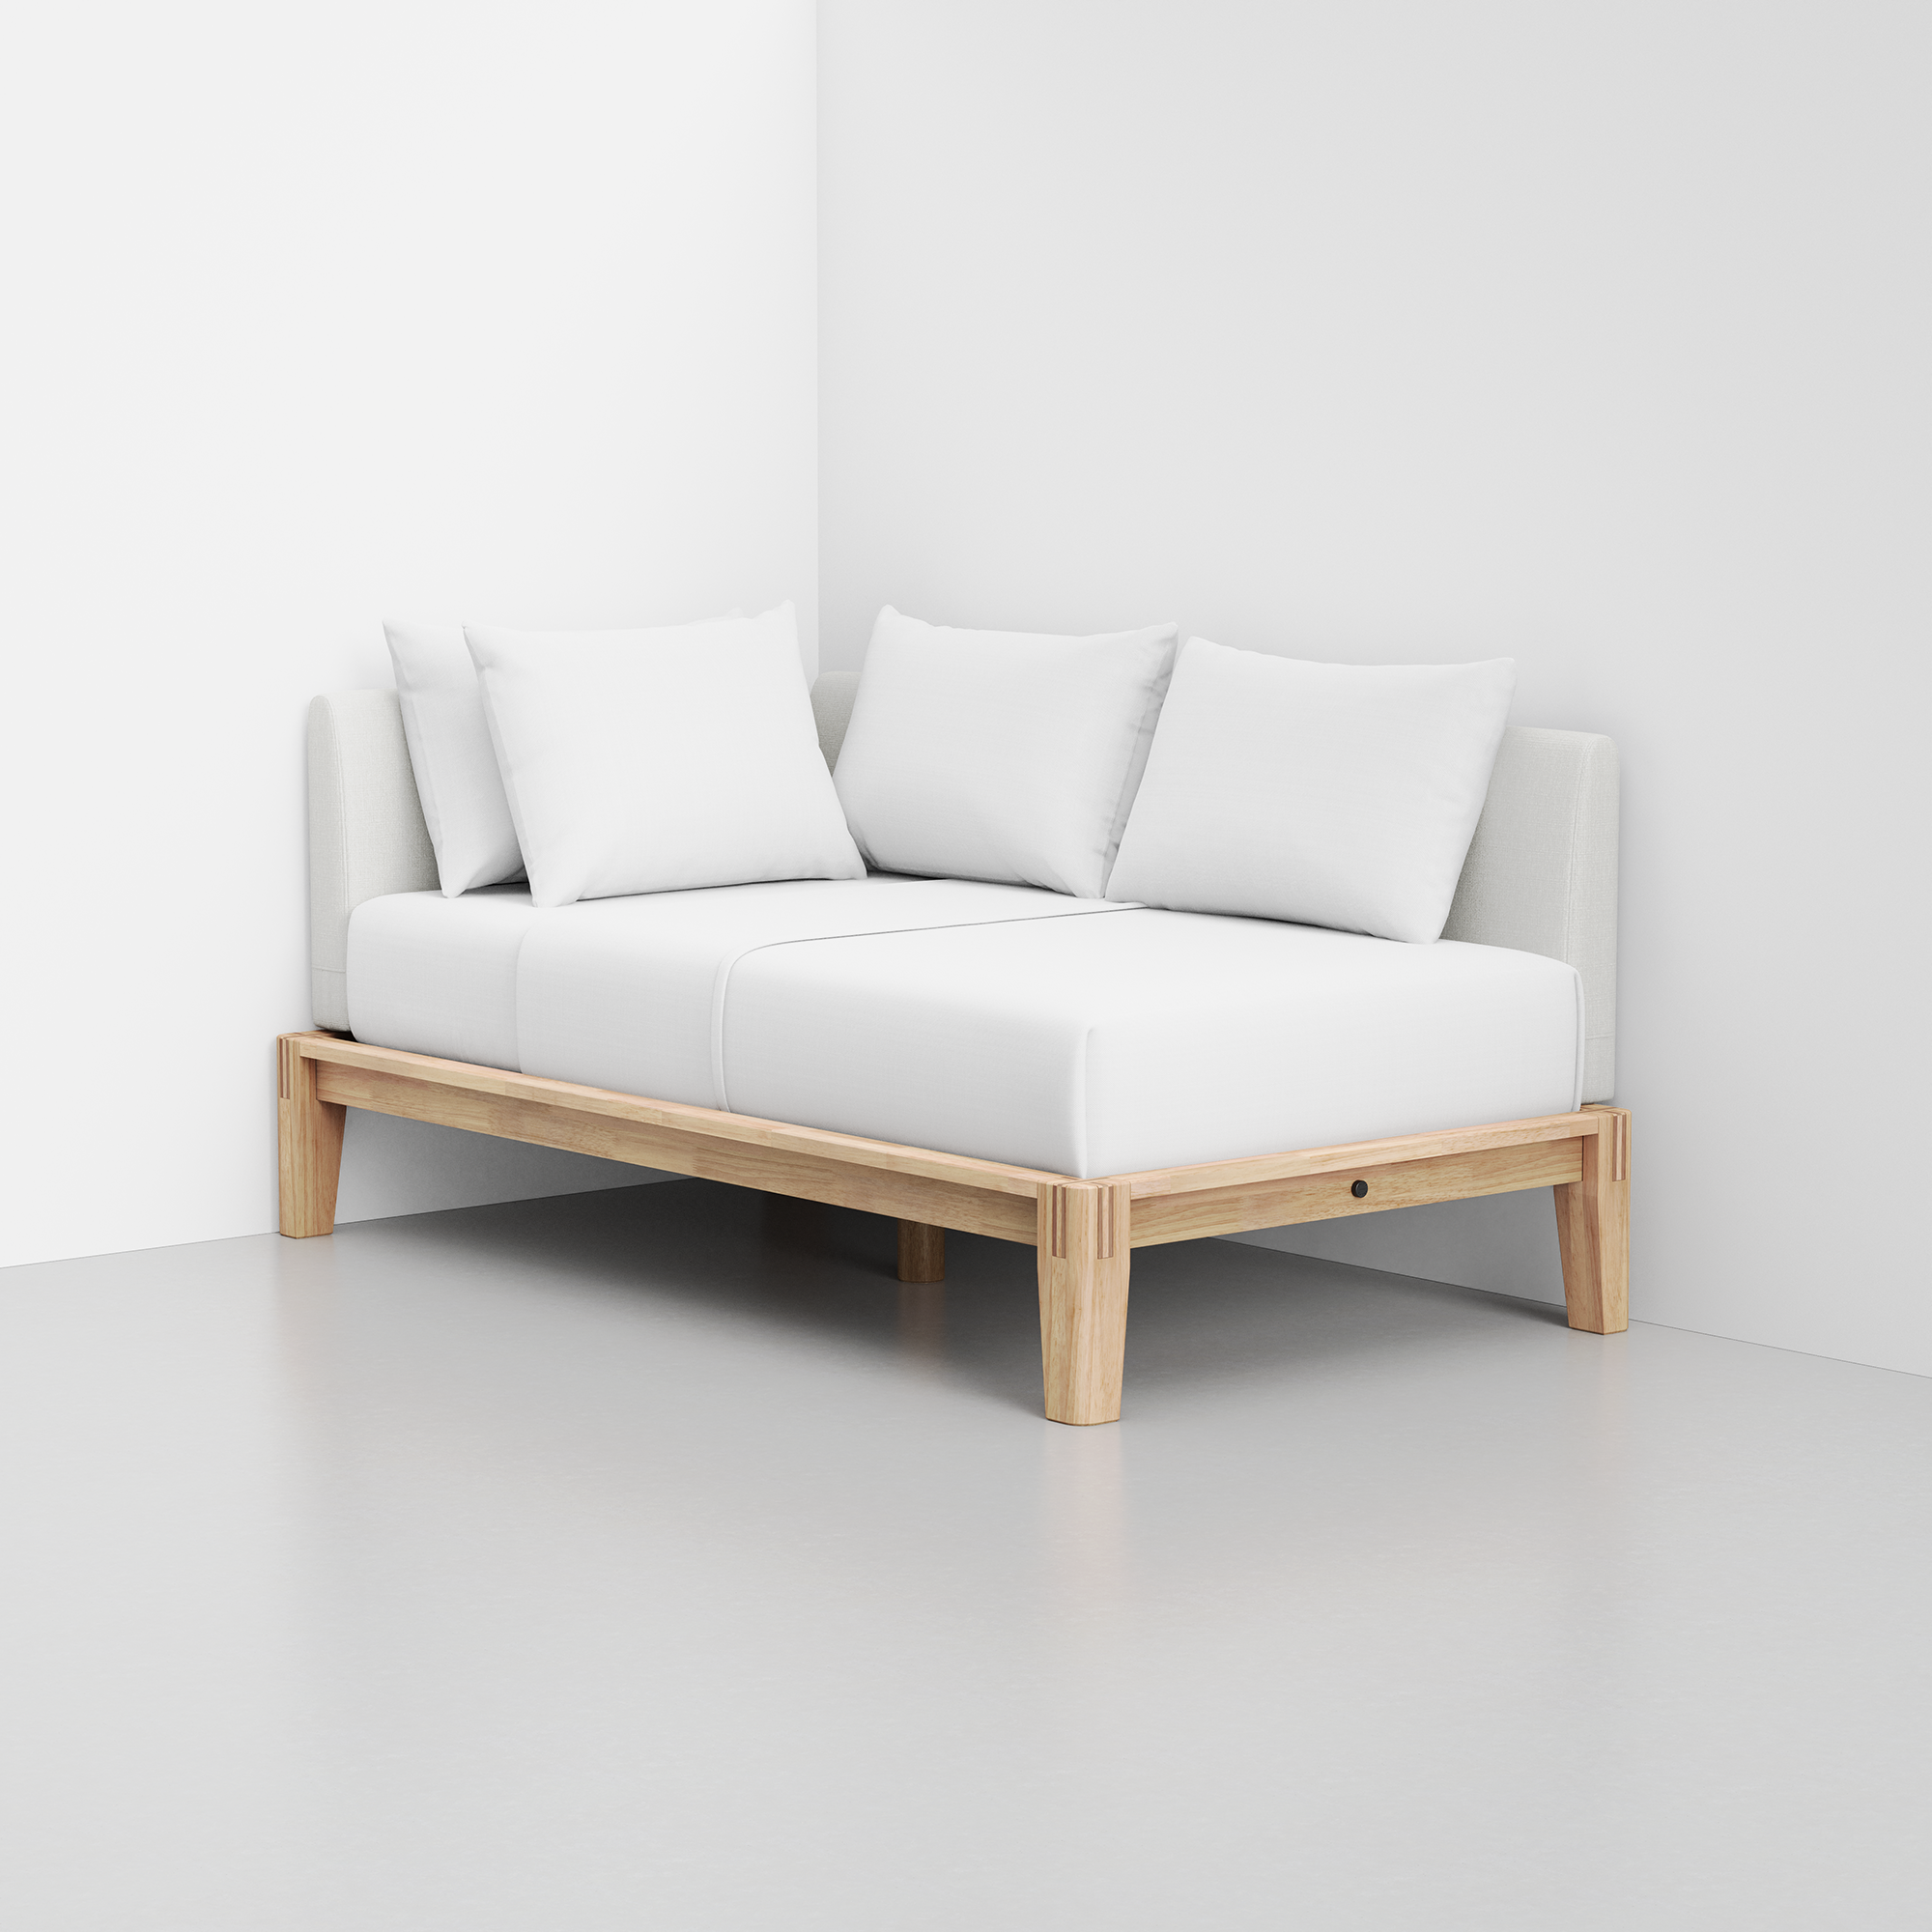 PDP Image: The Daybed (Natural / Light Linen) - Rendering - Pillows